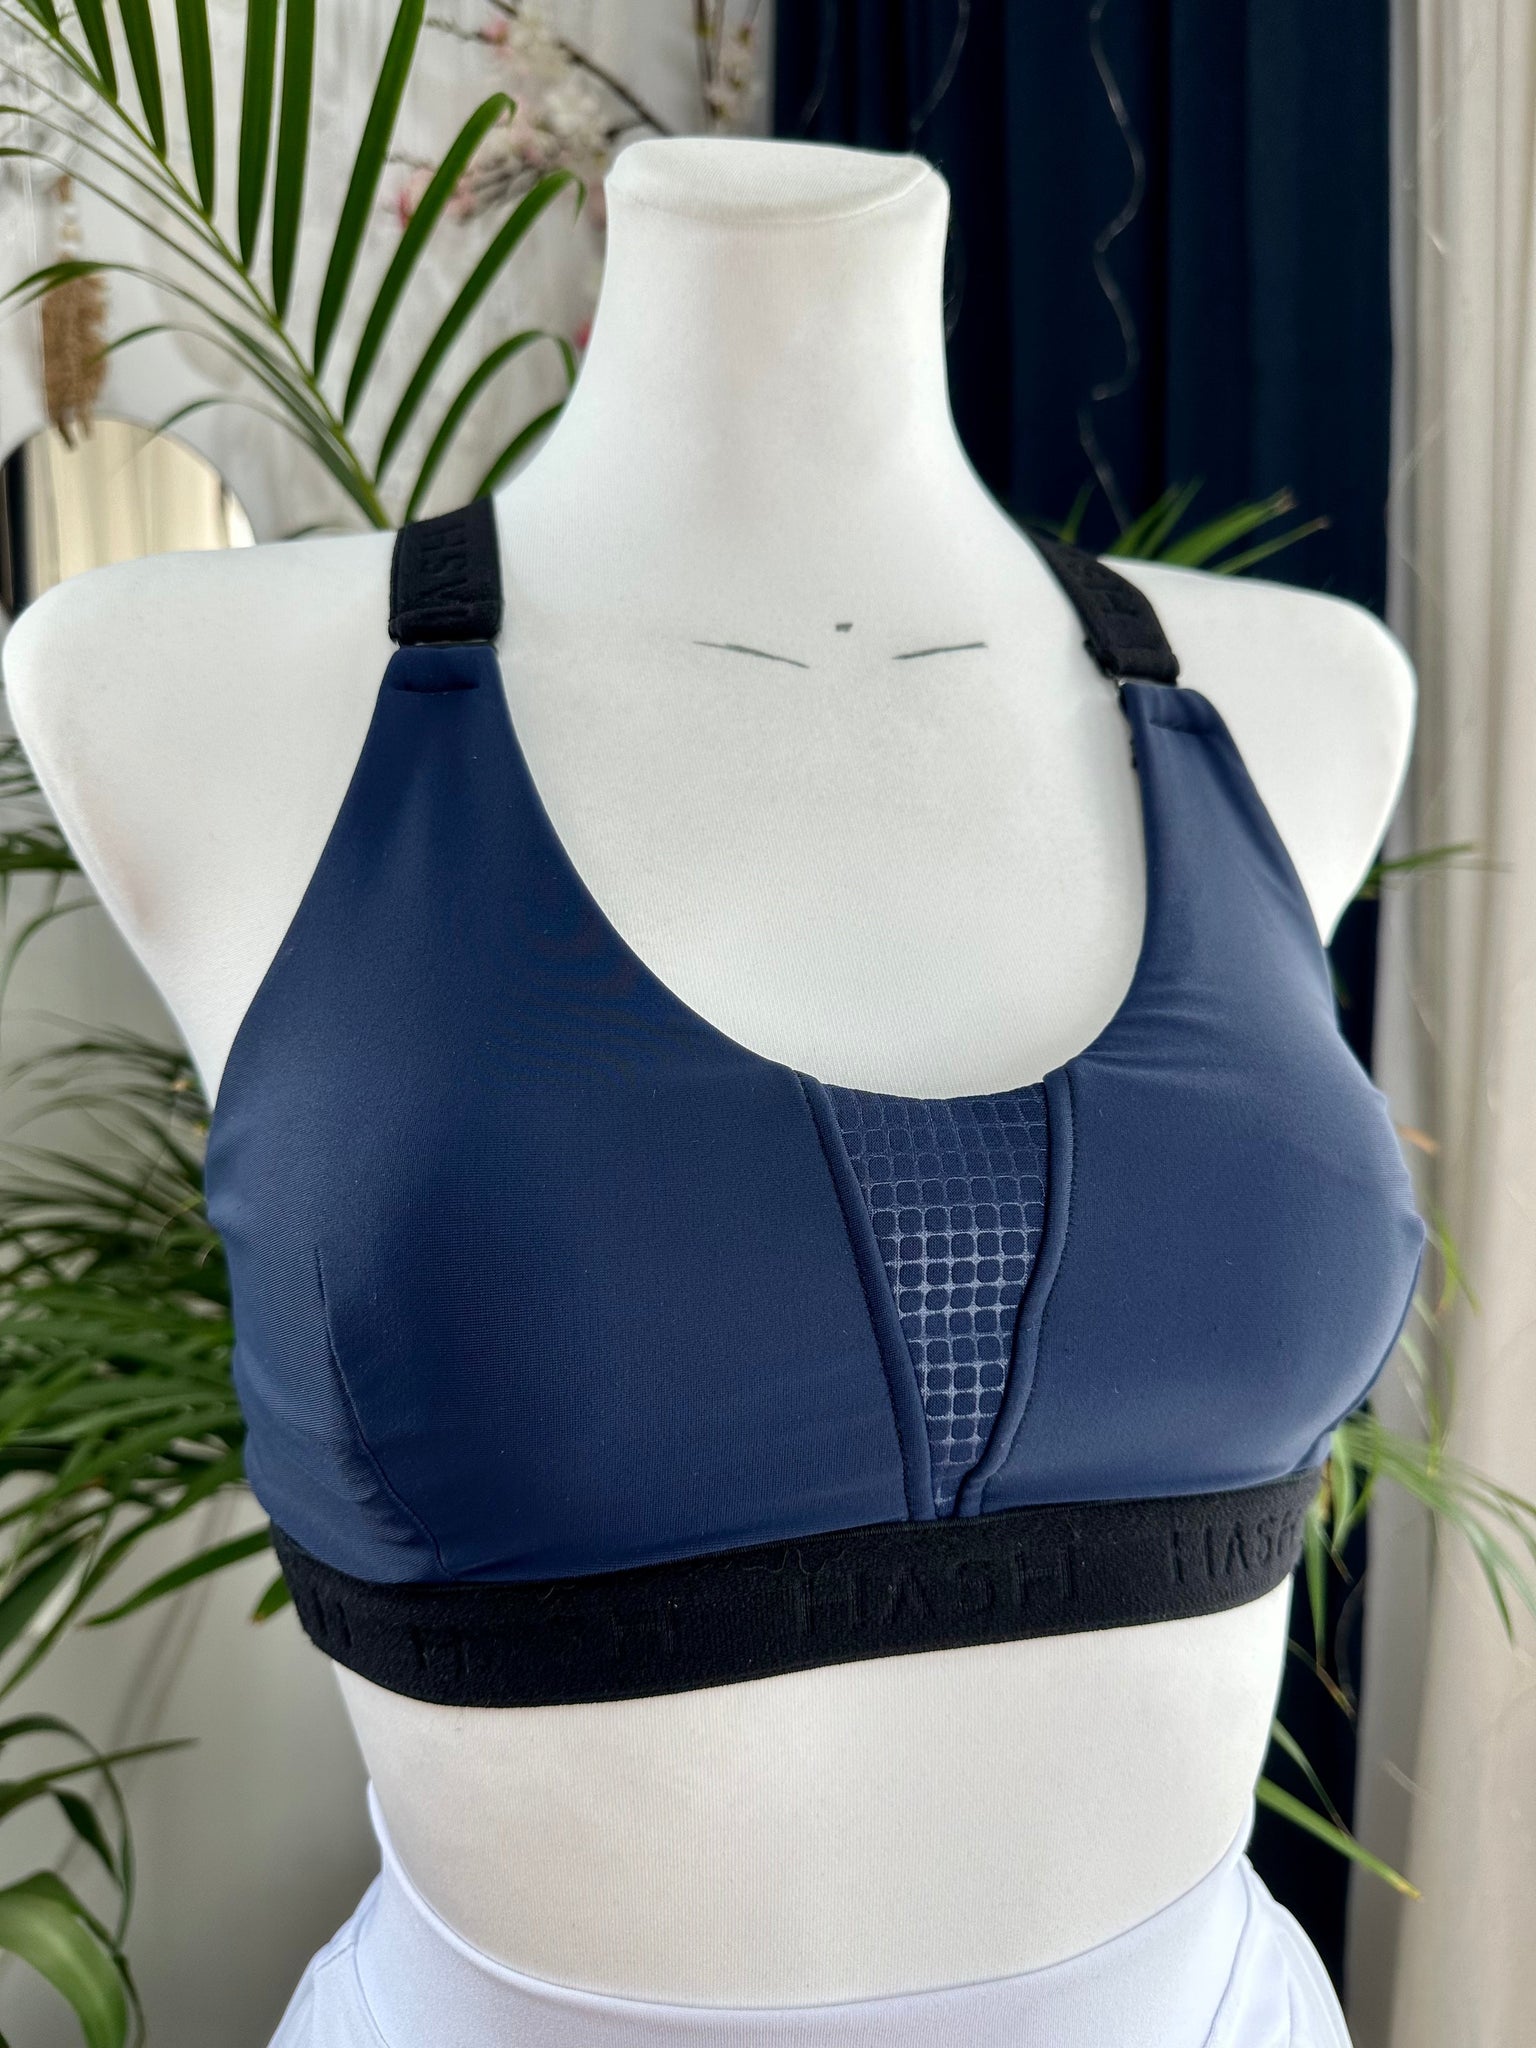 TOP KIM NAVY BLUE OUTLET -35%